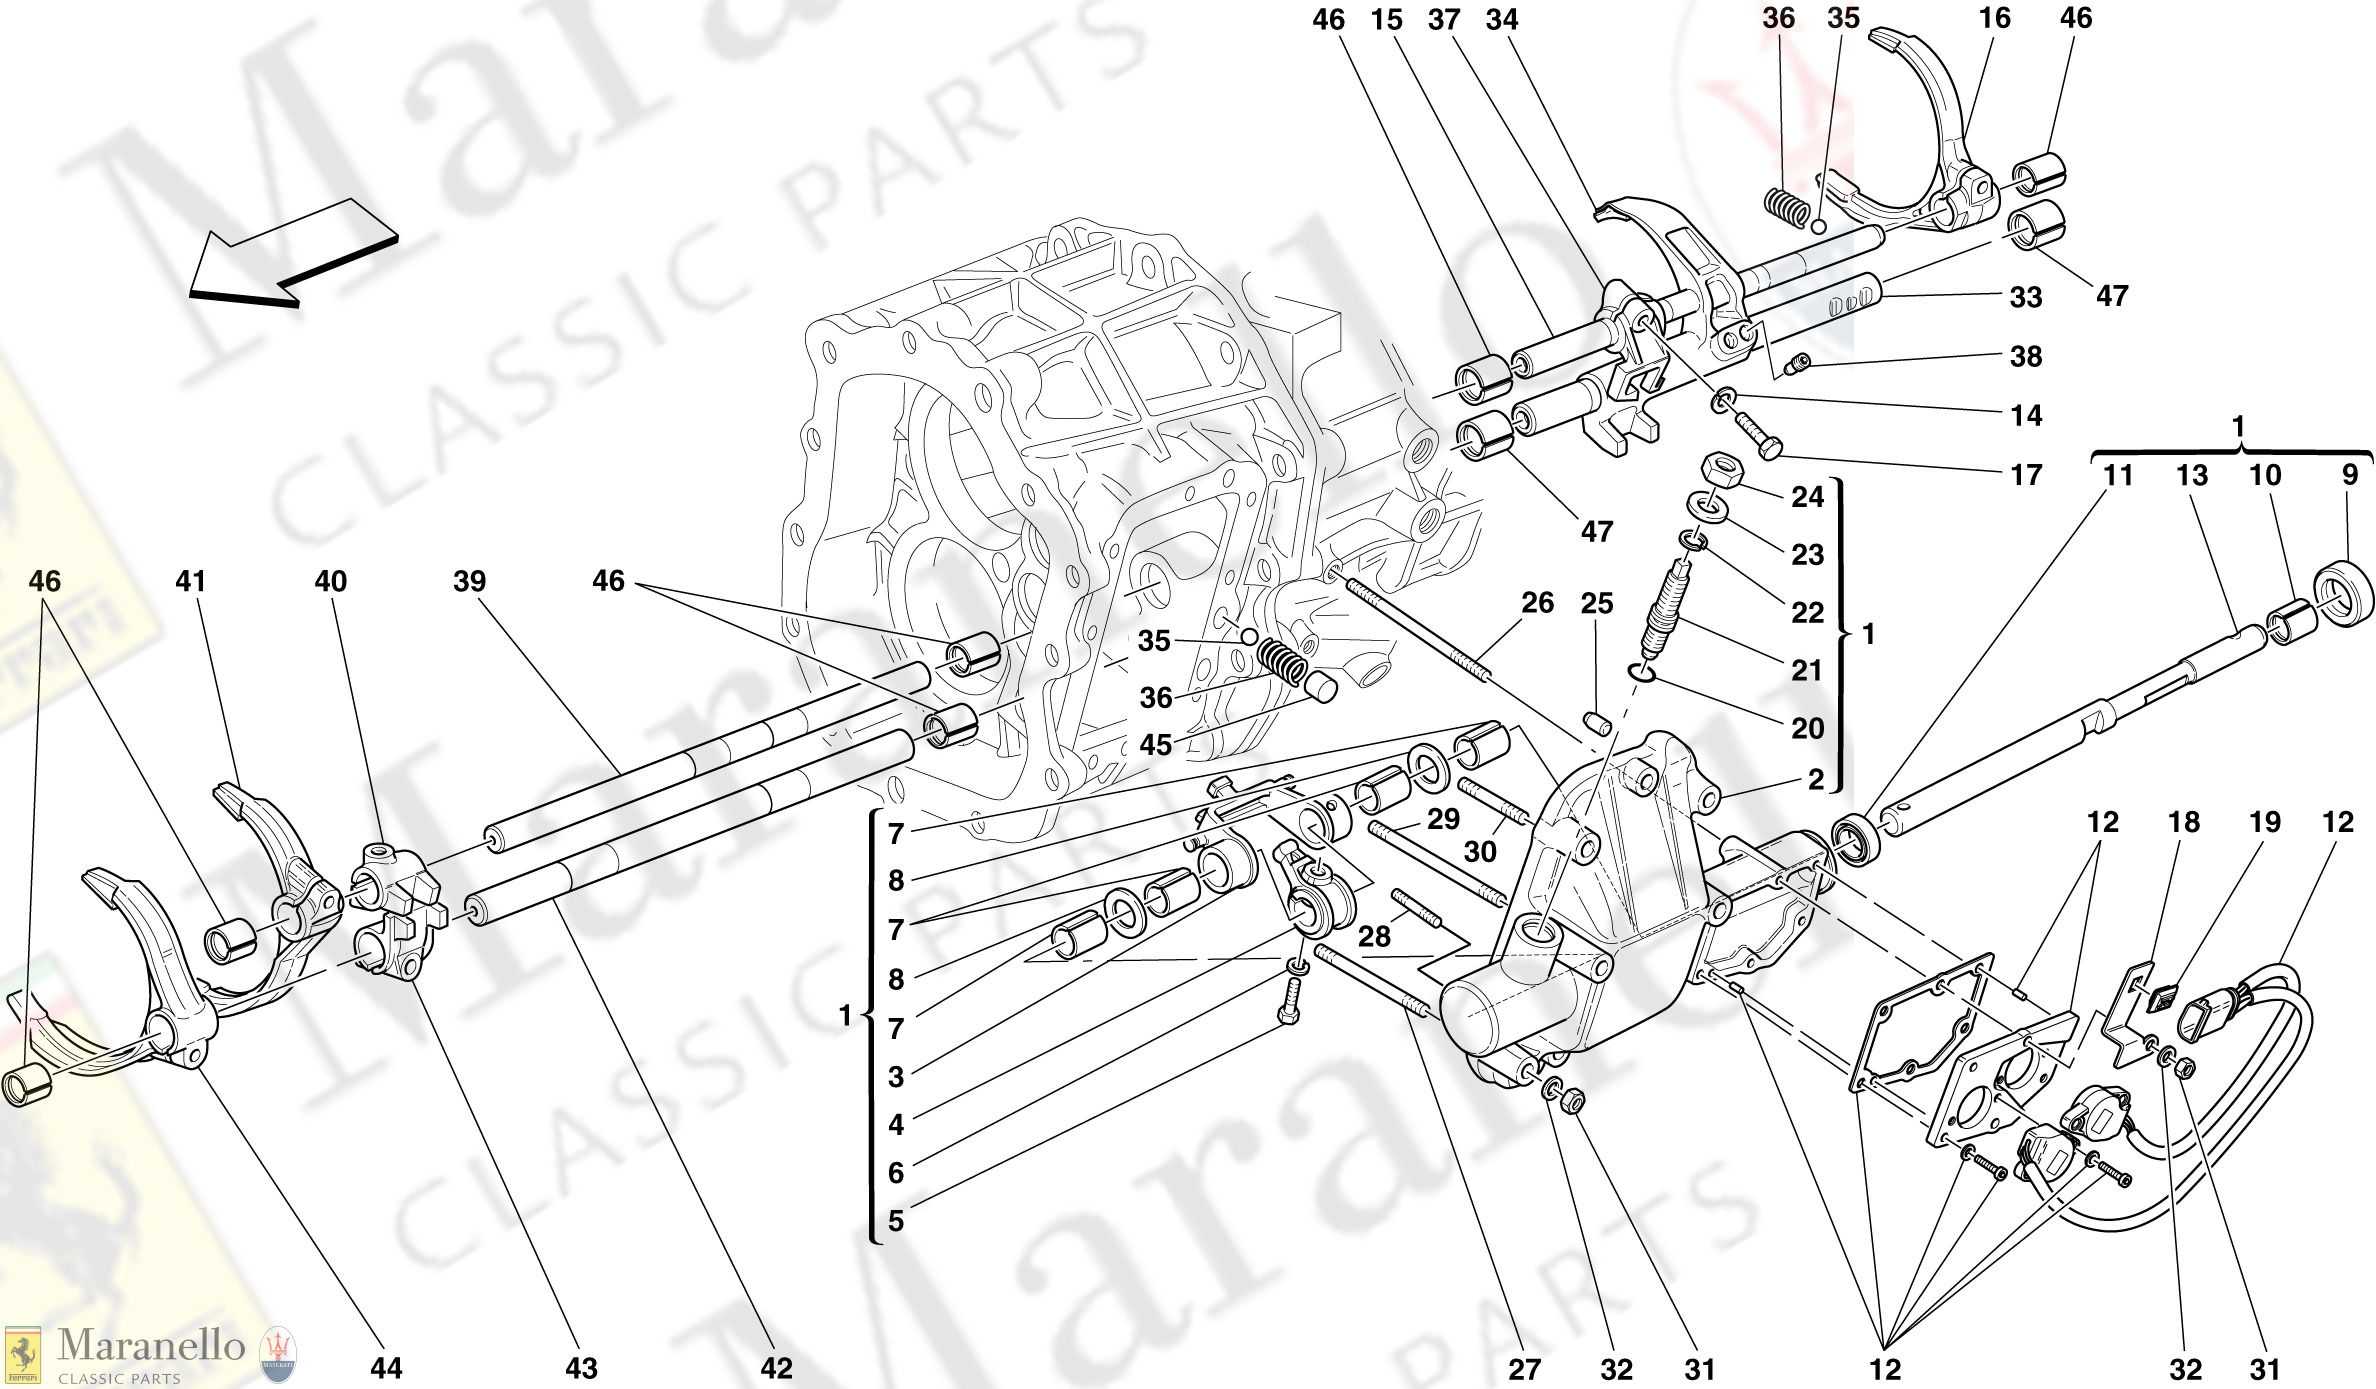 030 - Internal Gearbox Controls -Applicable For F1-